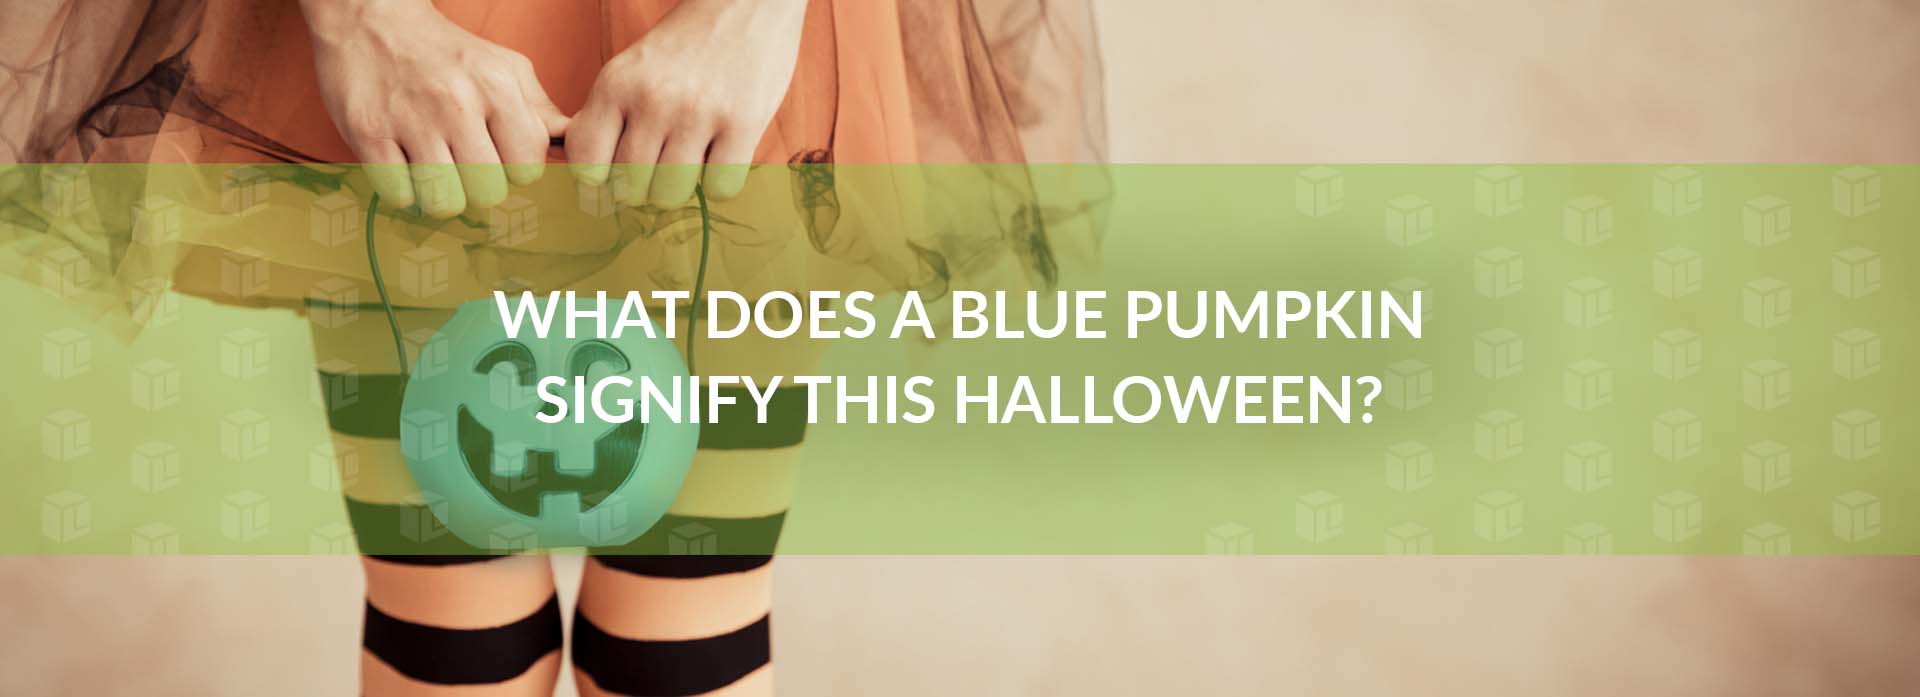 What Does A Blue Pumpkin Signify This Halloween?